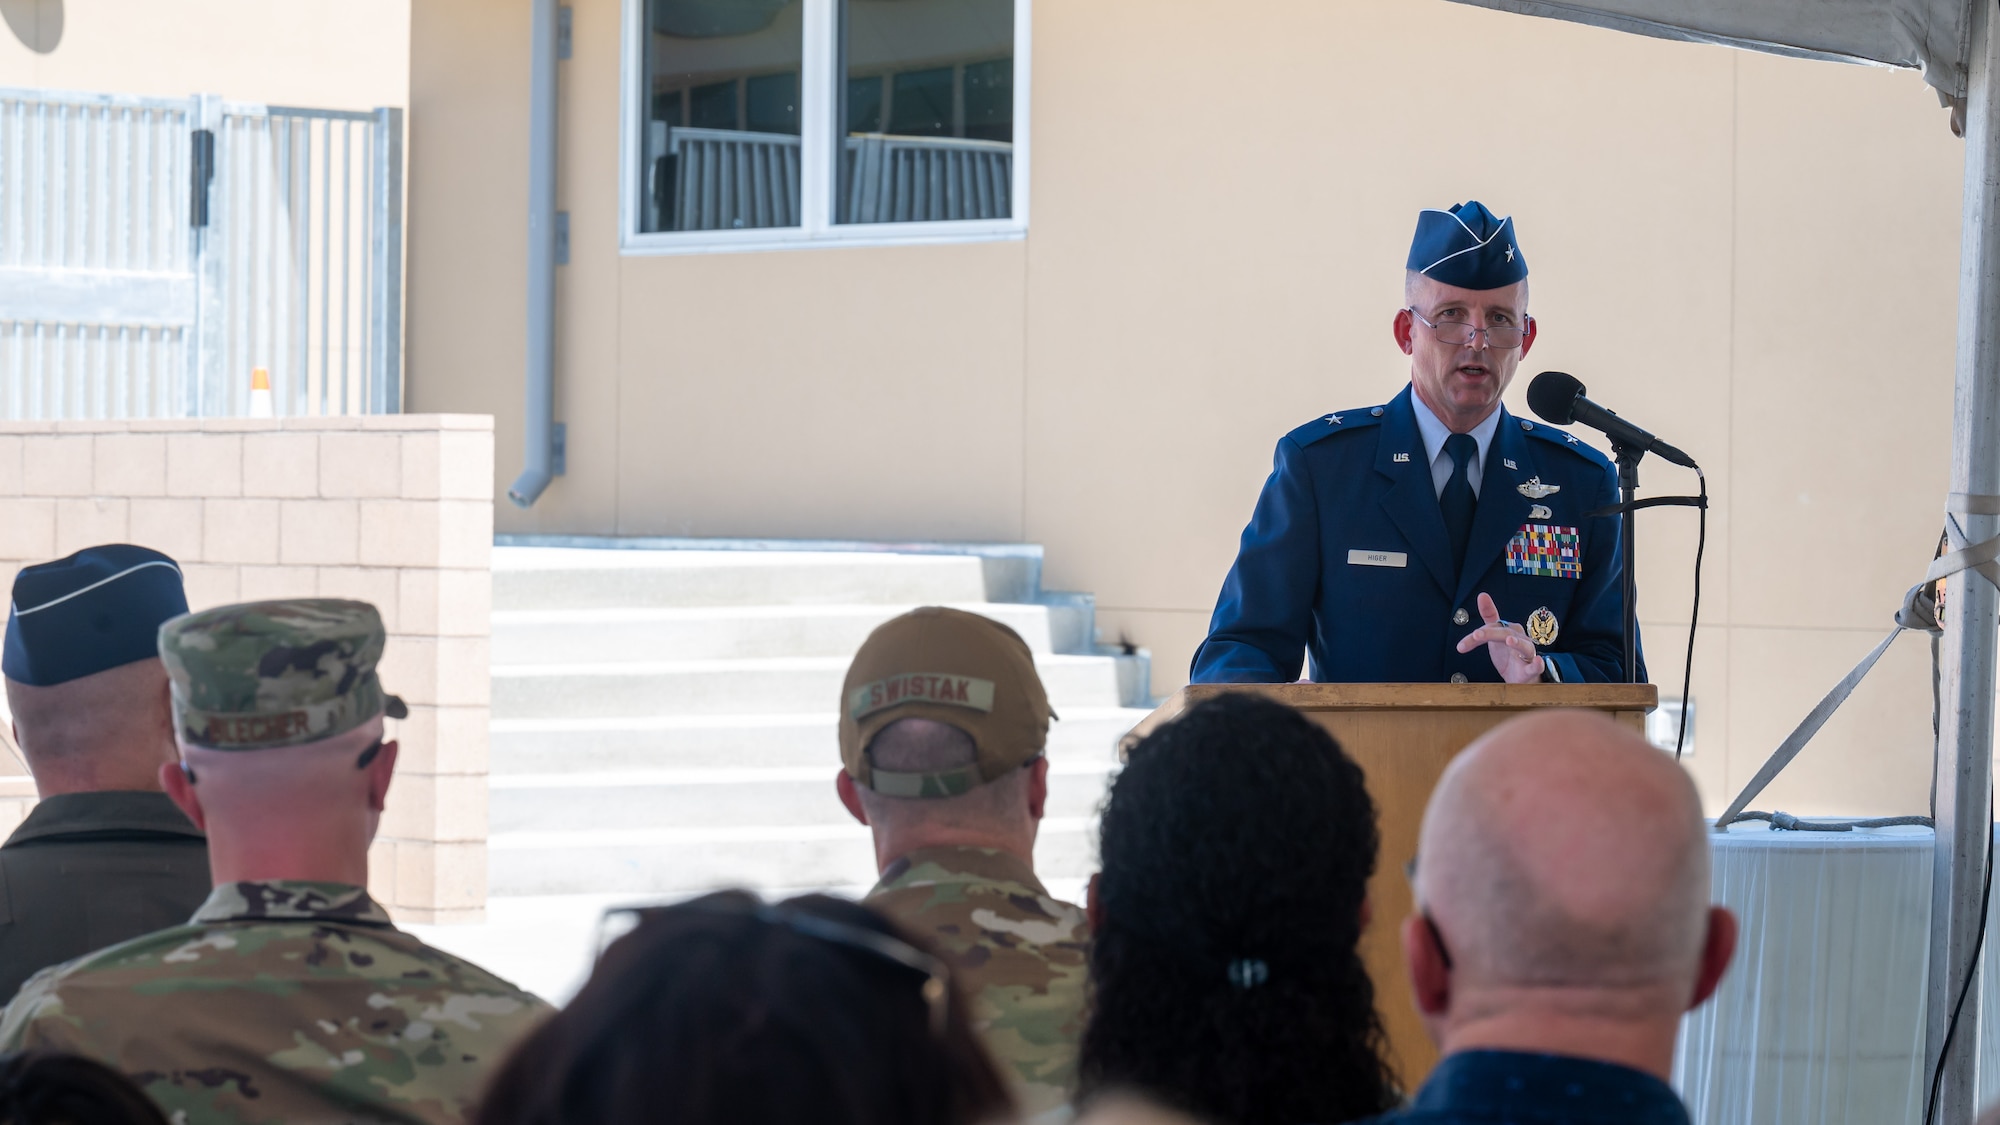 Brig. Gen. Matthew Higer, 412th Test Wing Commander, provides his remarks during the ribbon cutting event for the Desert Jr./Sr. High School reopening on Edwards Air Force Base, California, Aug. 9. (Air Force photo by Giancarlo Casem)